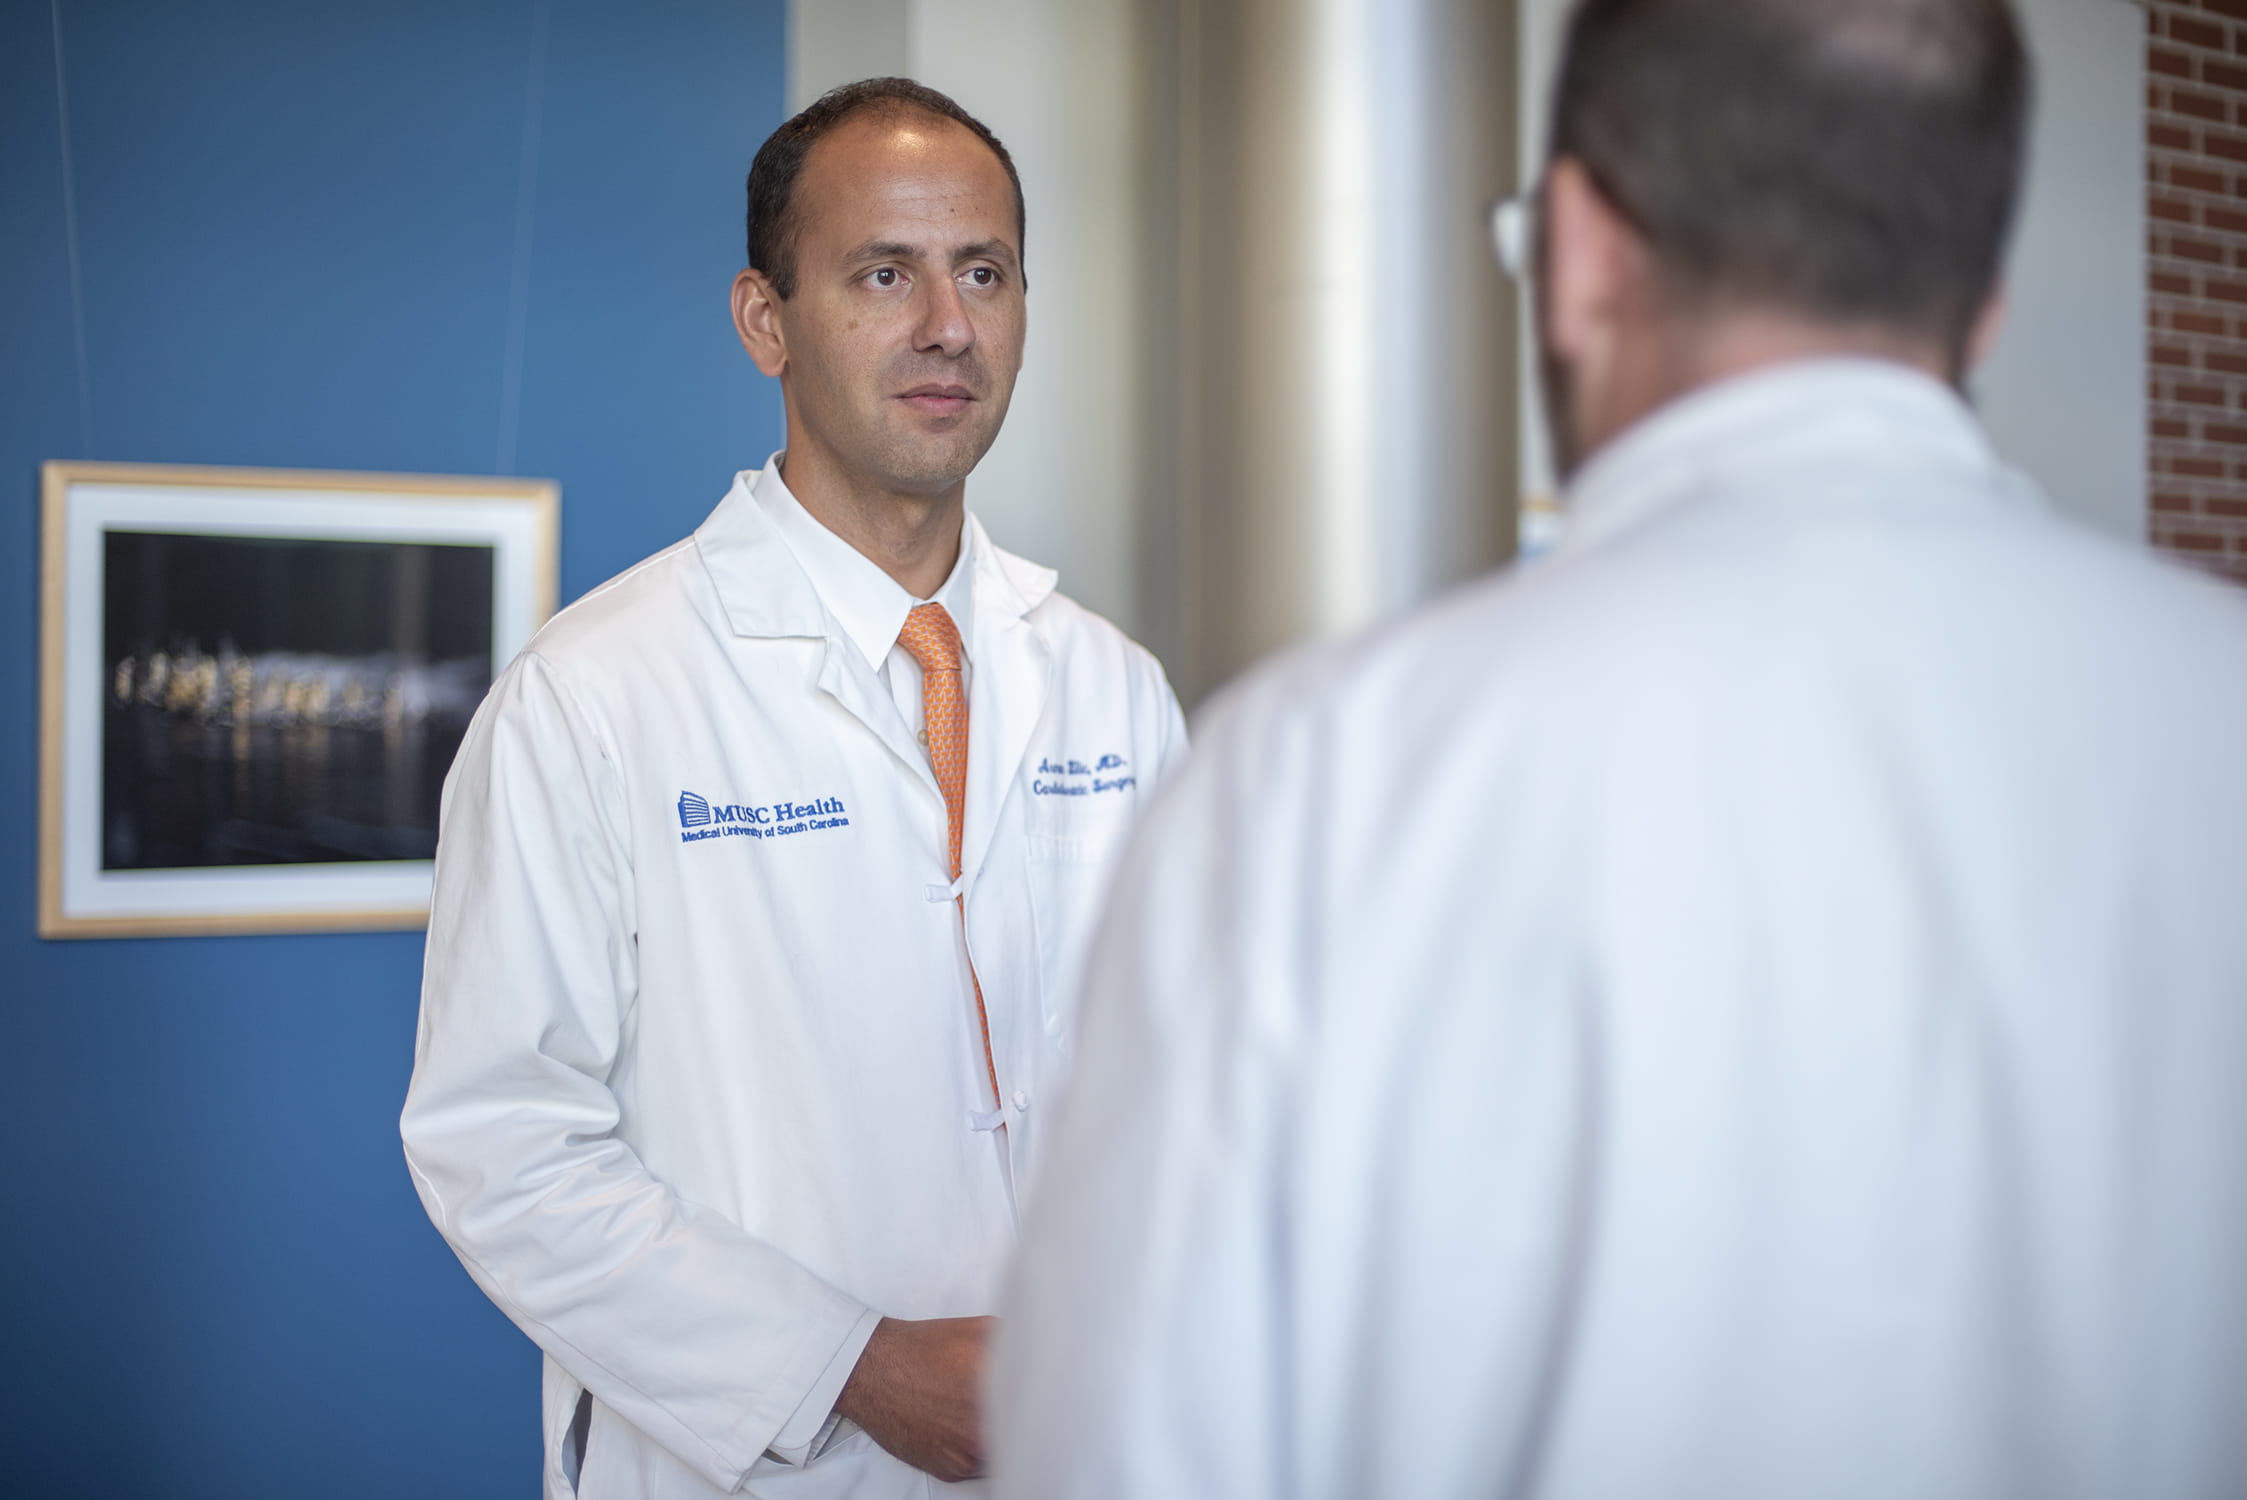 Arman Kilic, M.D., speaking with a colleague